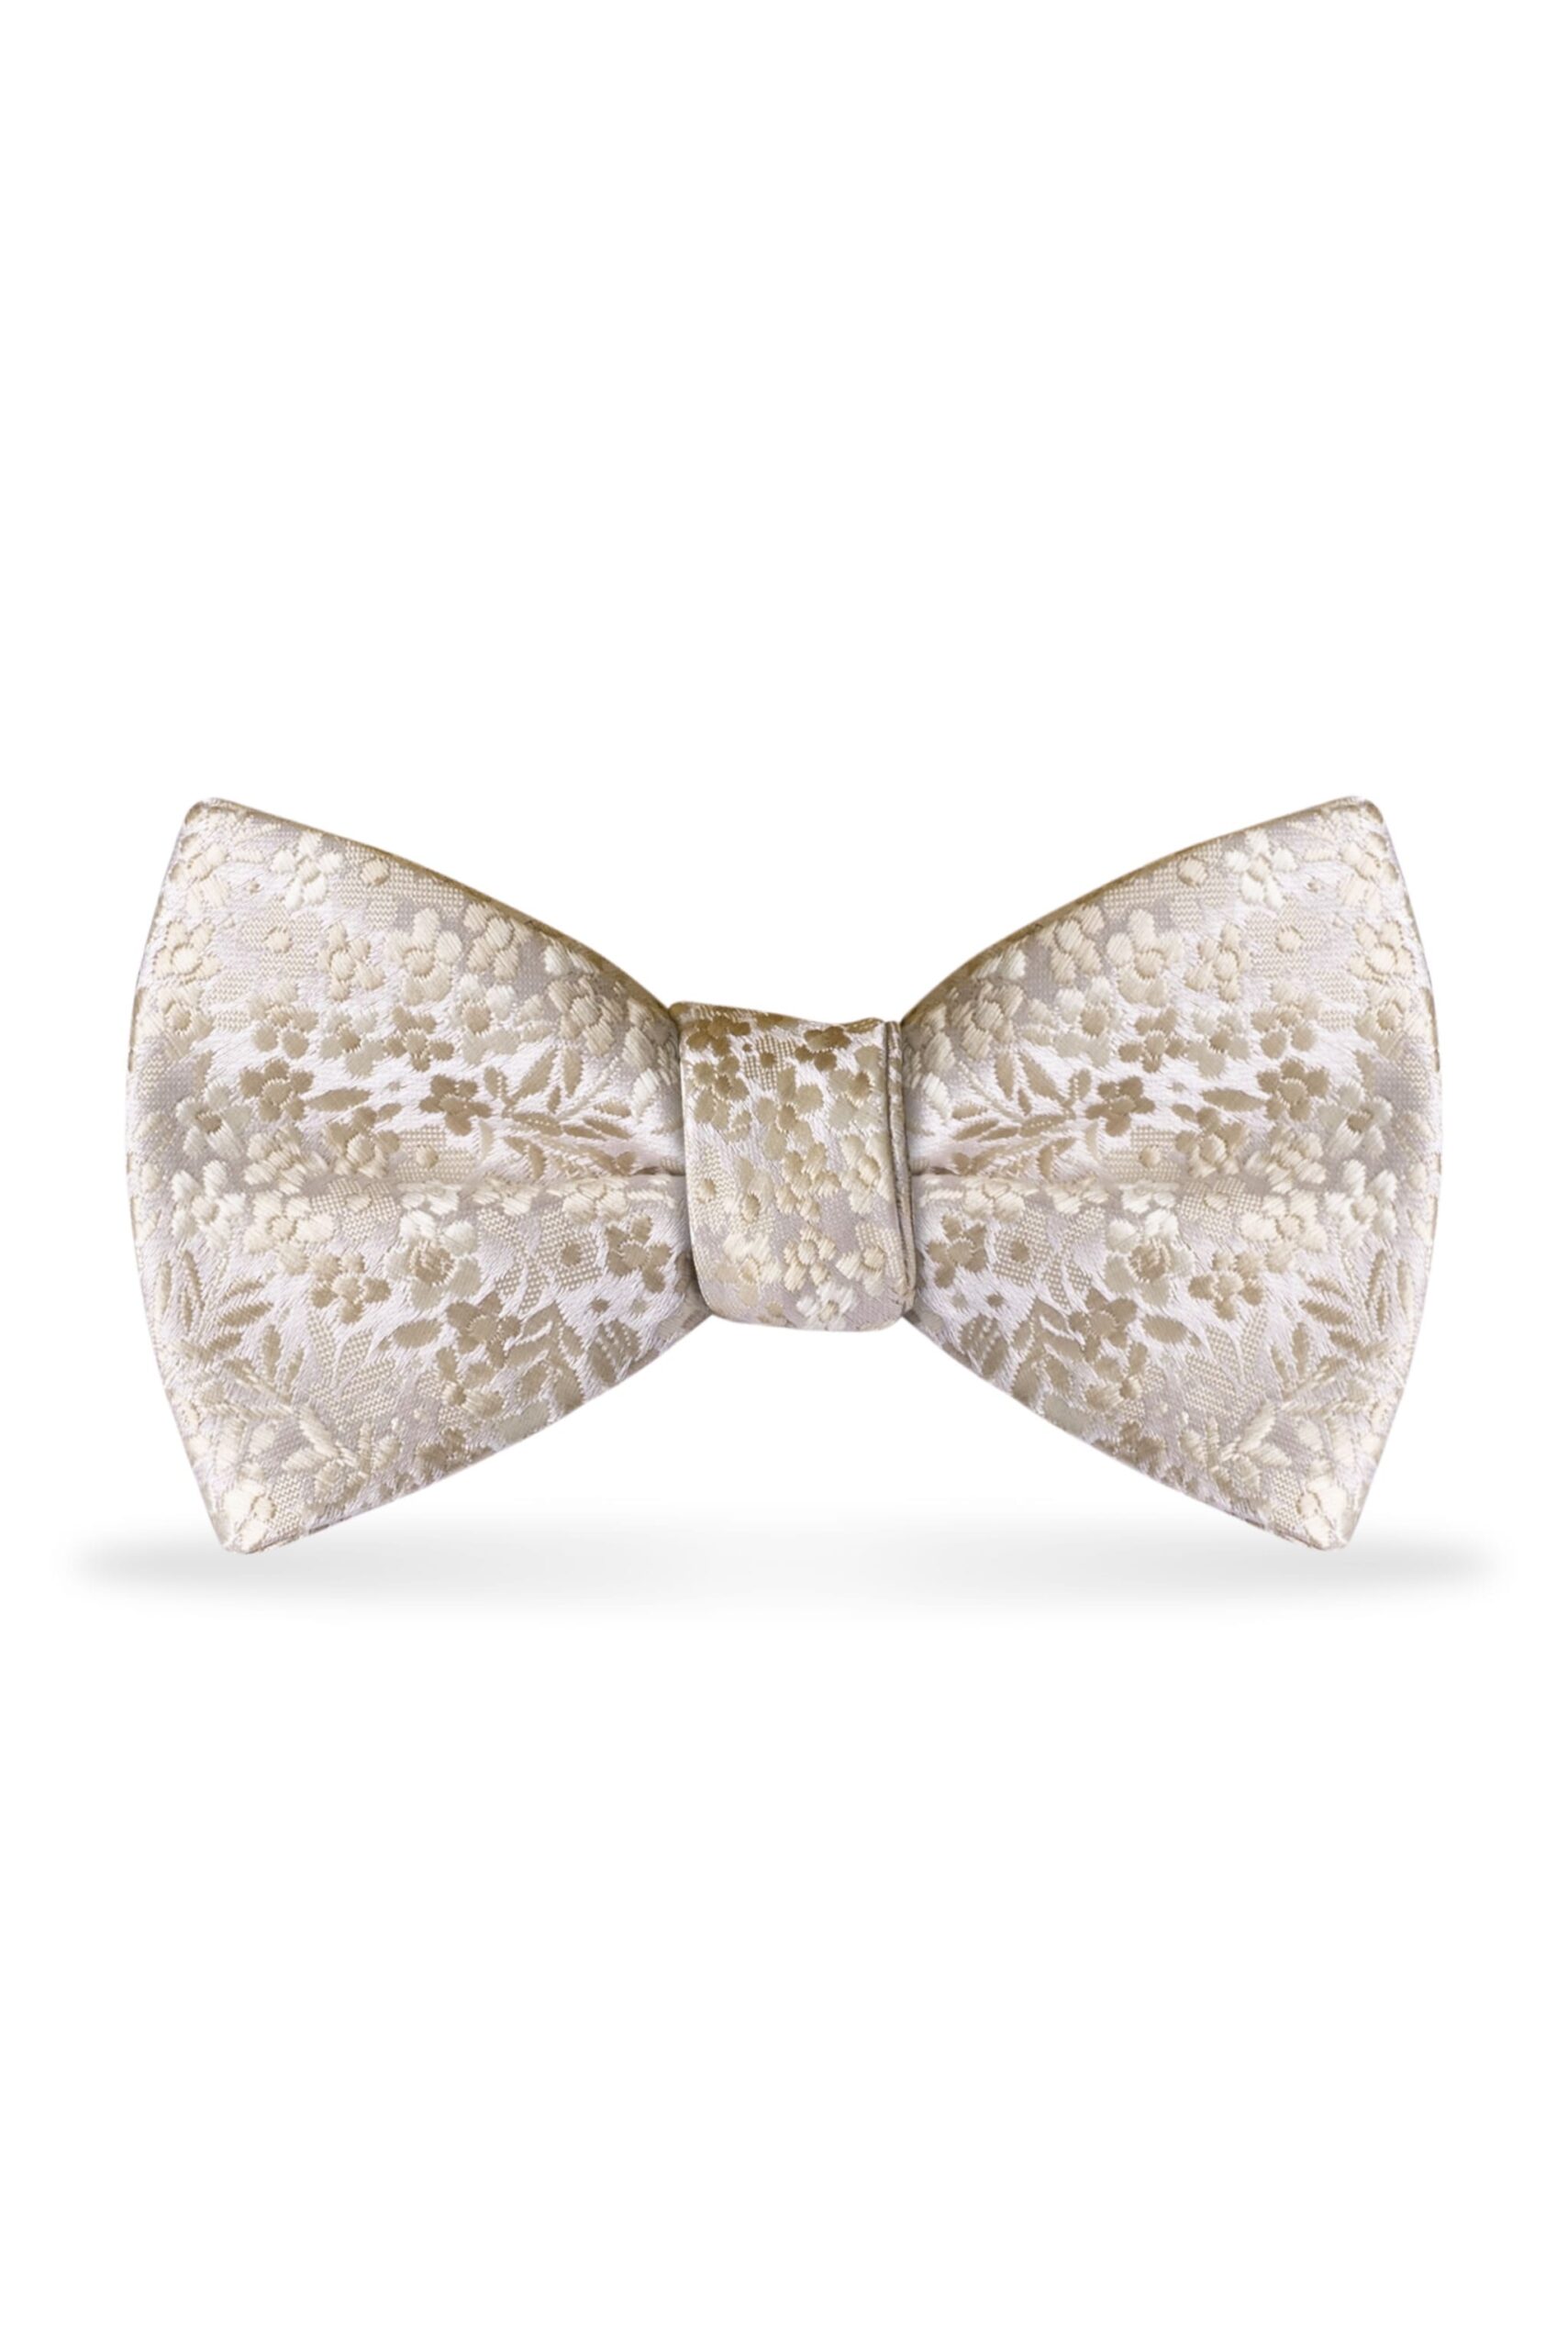 Floral Champagne Bow Tie 1